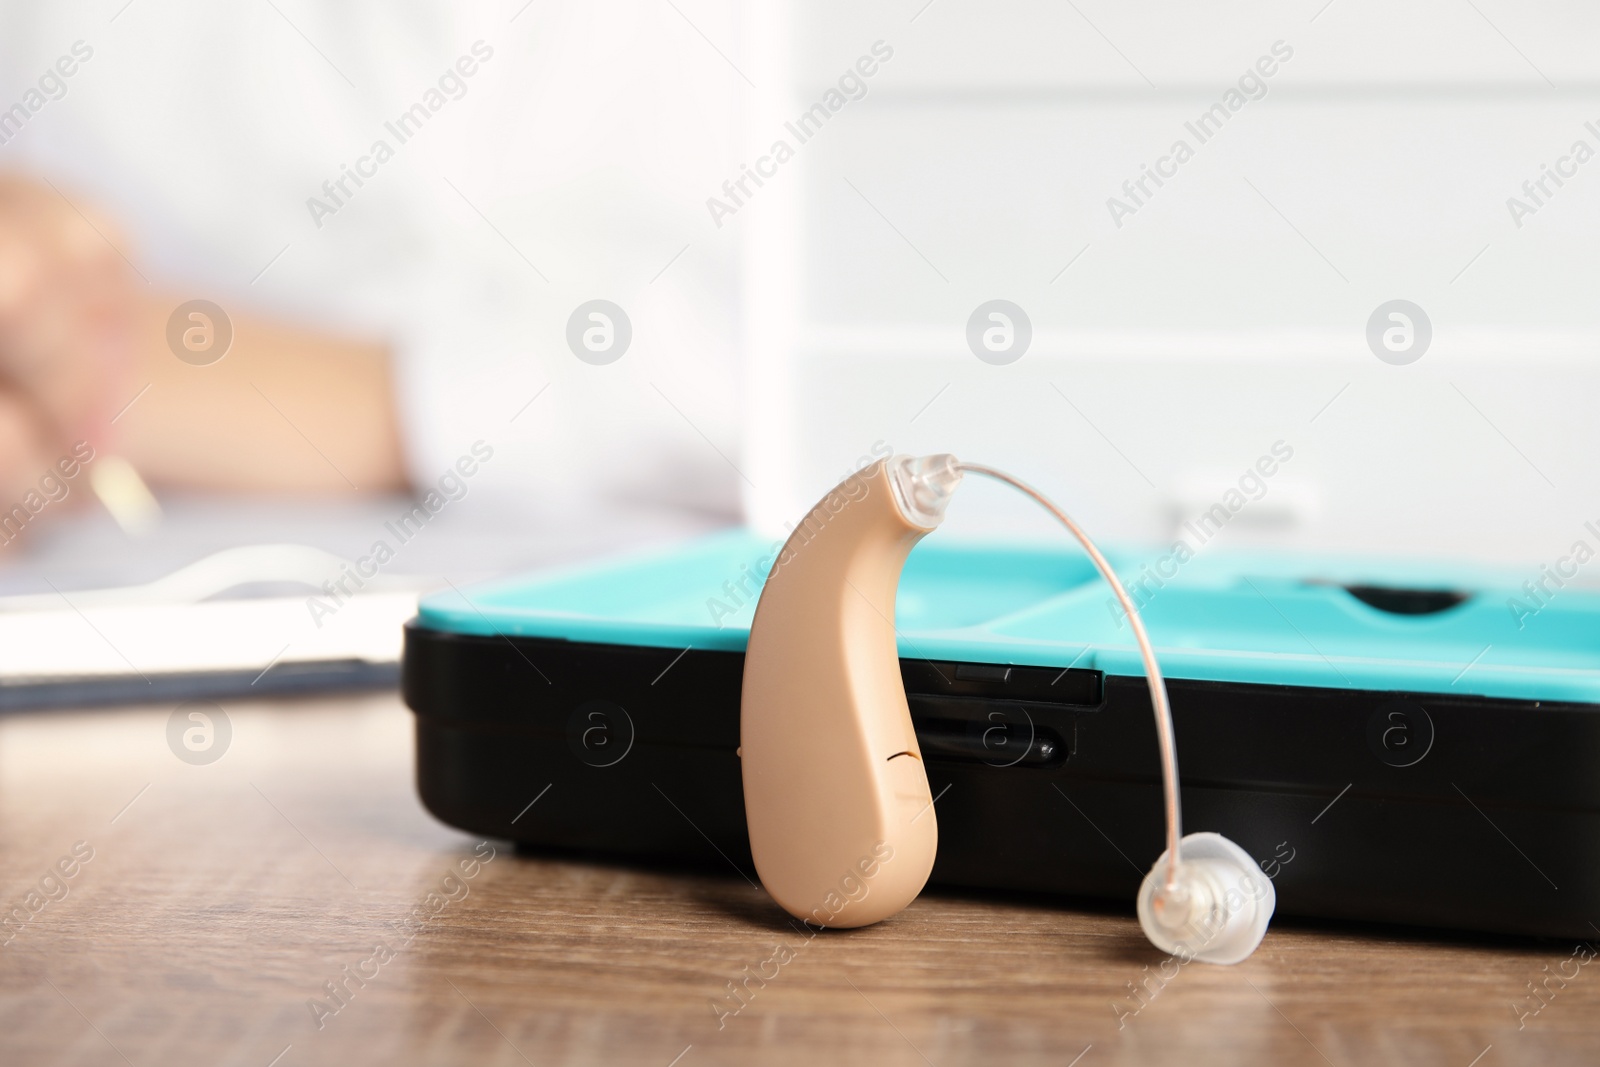 Photo of Hearing aid with box on wooden table. Medical device